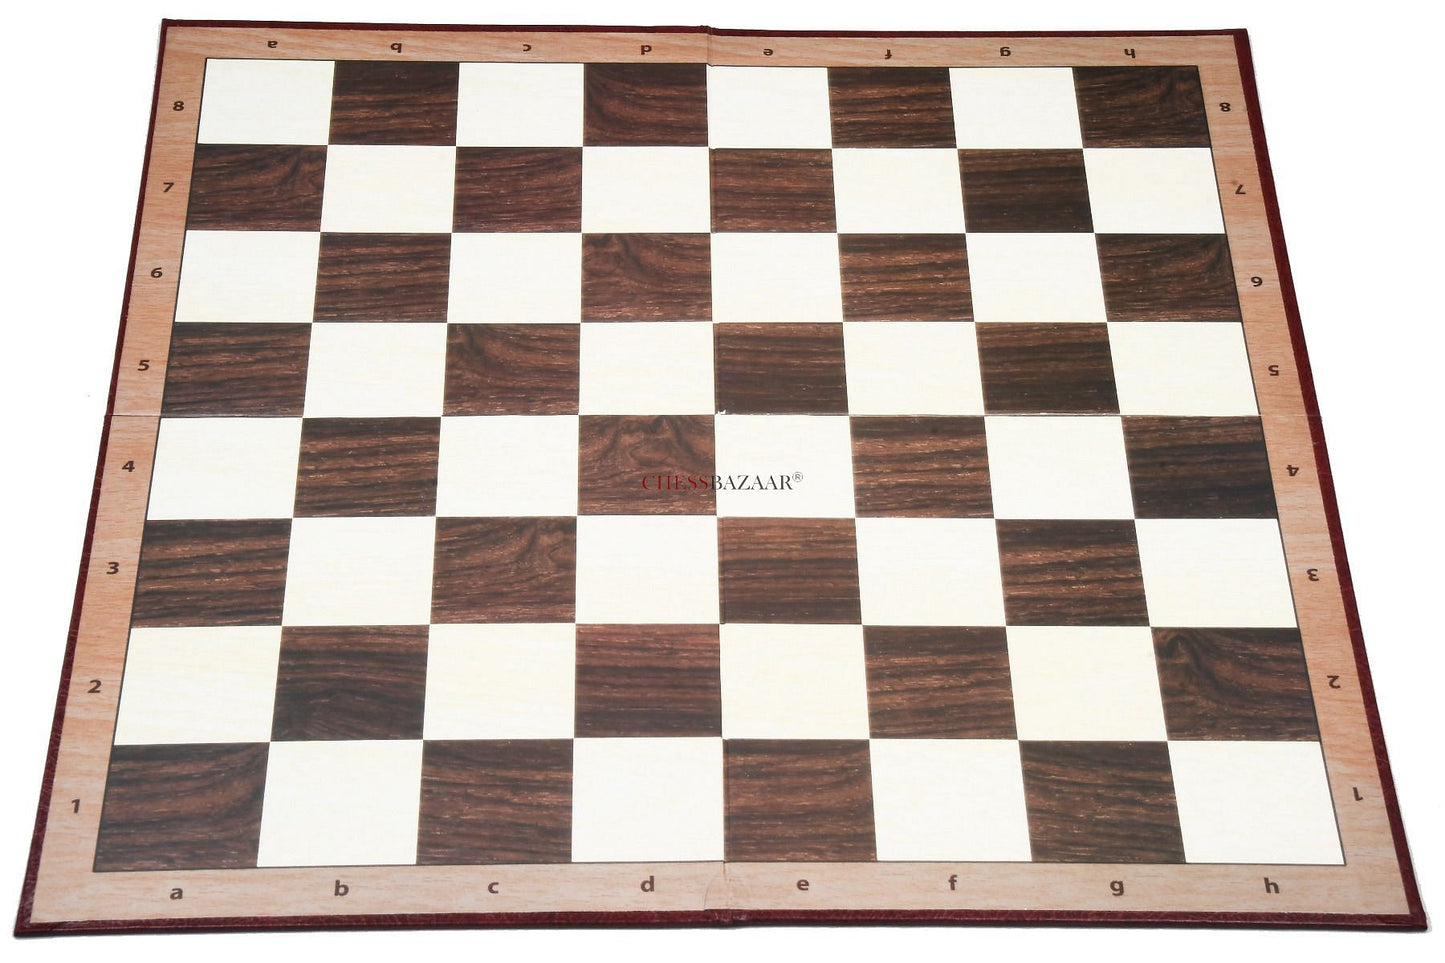 Folding Cardboard 19" Chess Board with Notations in Brown and Off White square - 55mm square